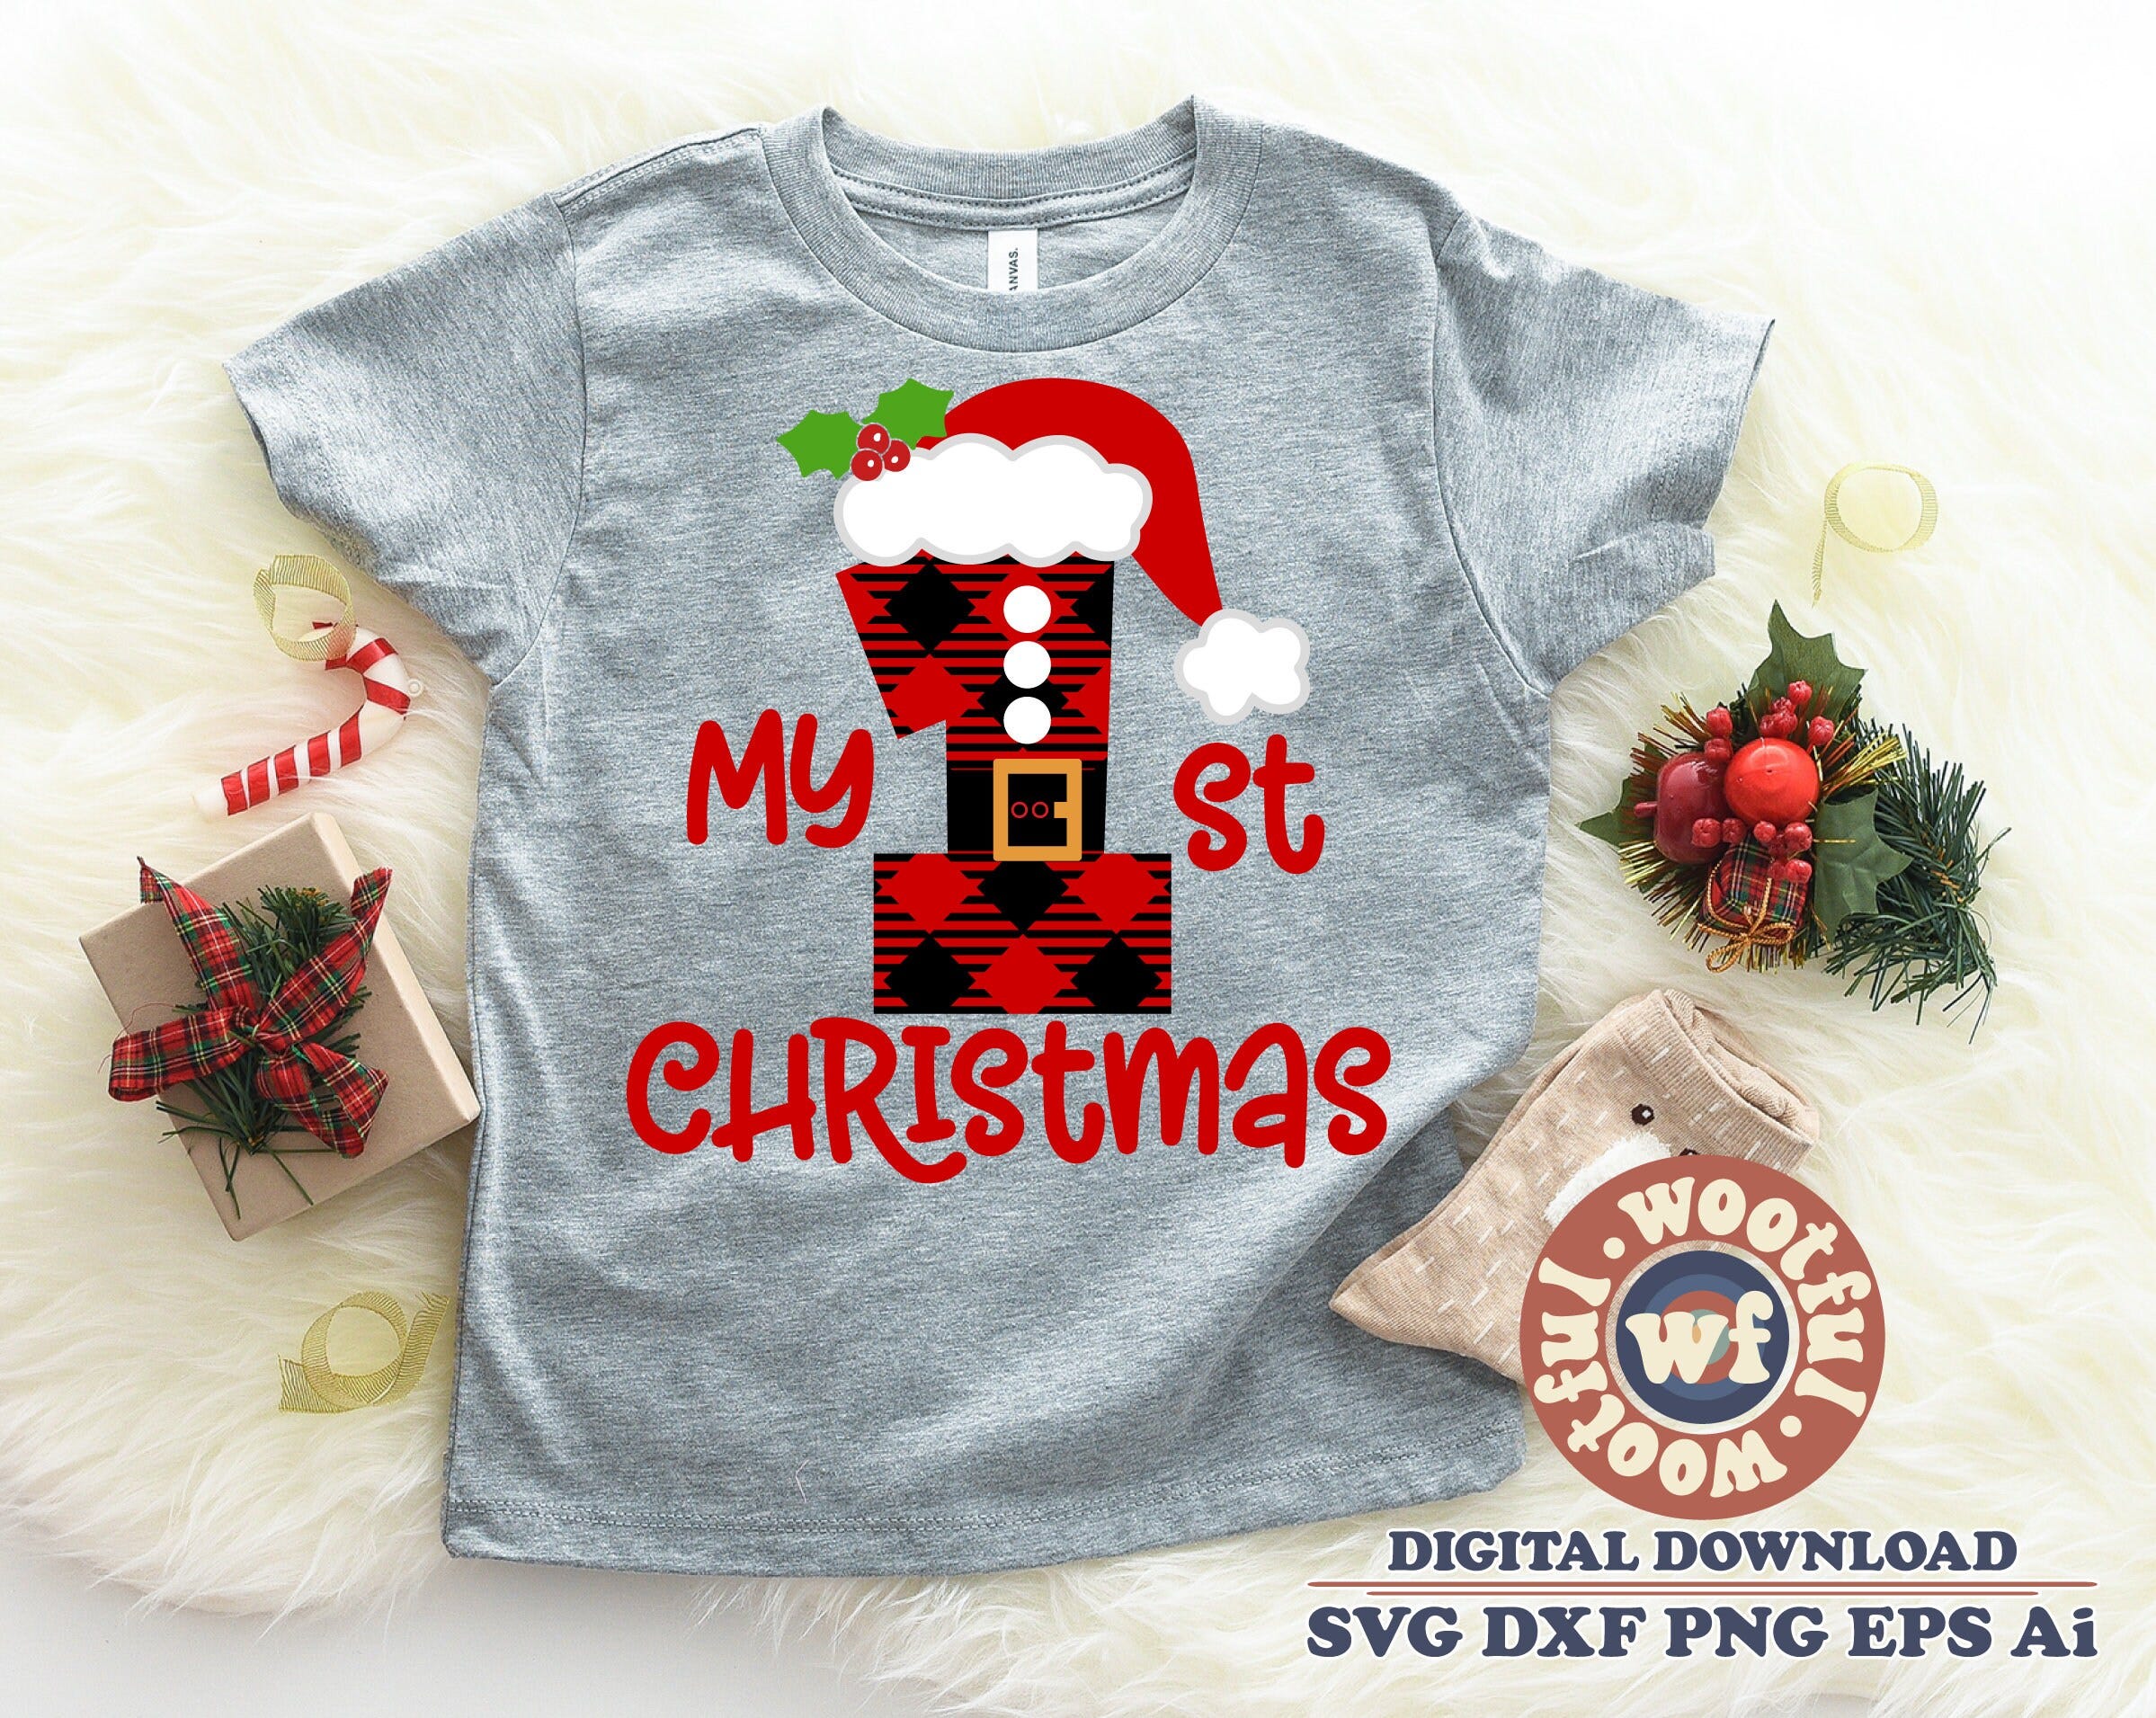 My First Christmas svg, Merry and Bright svg, Merry Christmas svg, Winter, Holiday svg, Buffalo plaid, Svg Dxf Eps Ai Png Silhouette Cricut